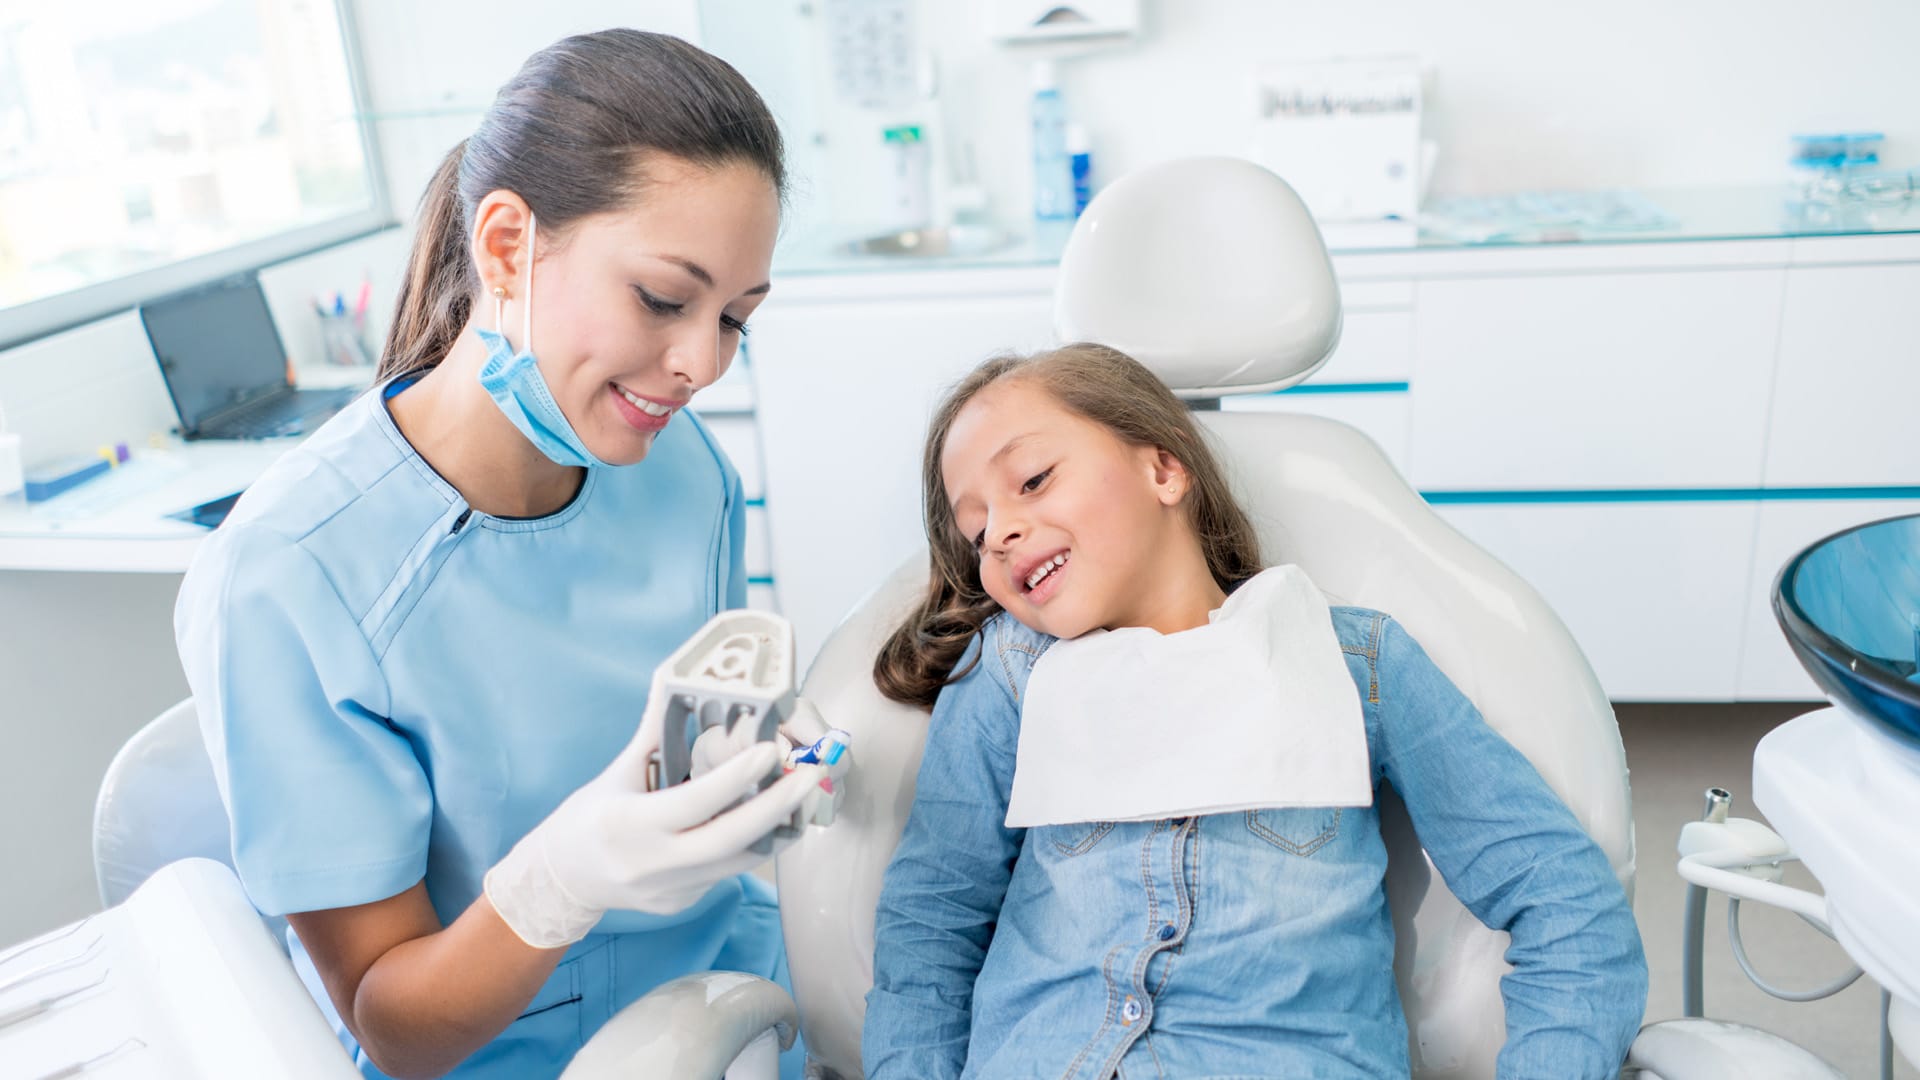 4 Services Offered by Dentists